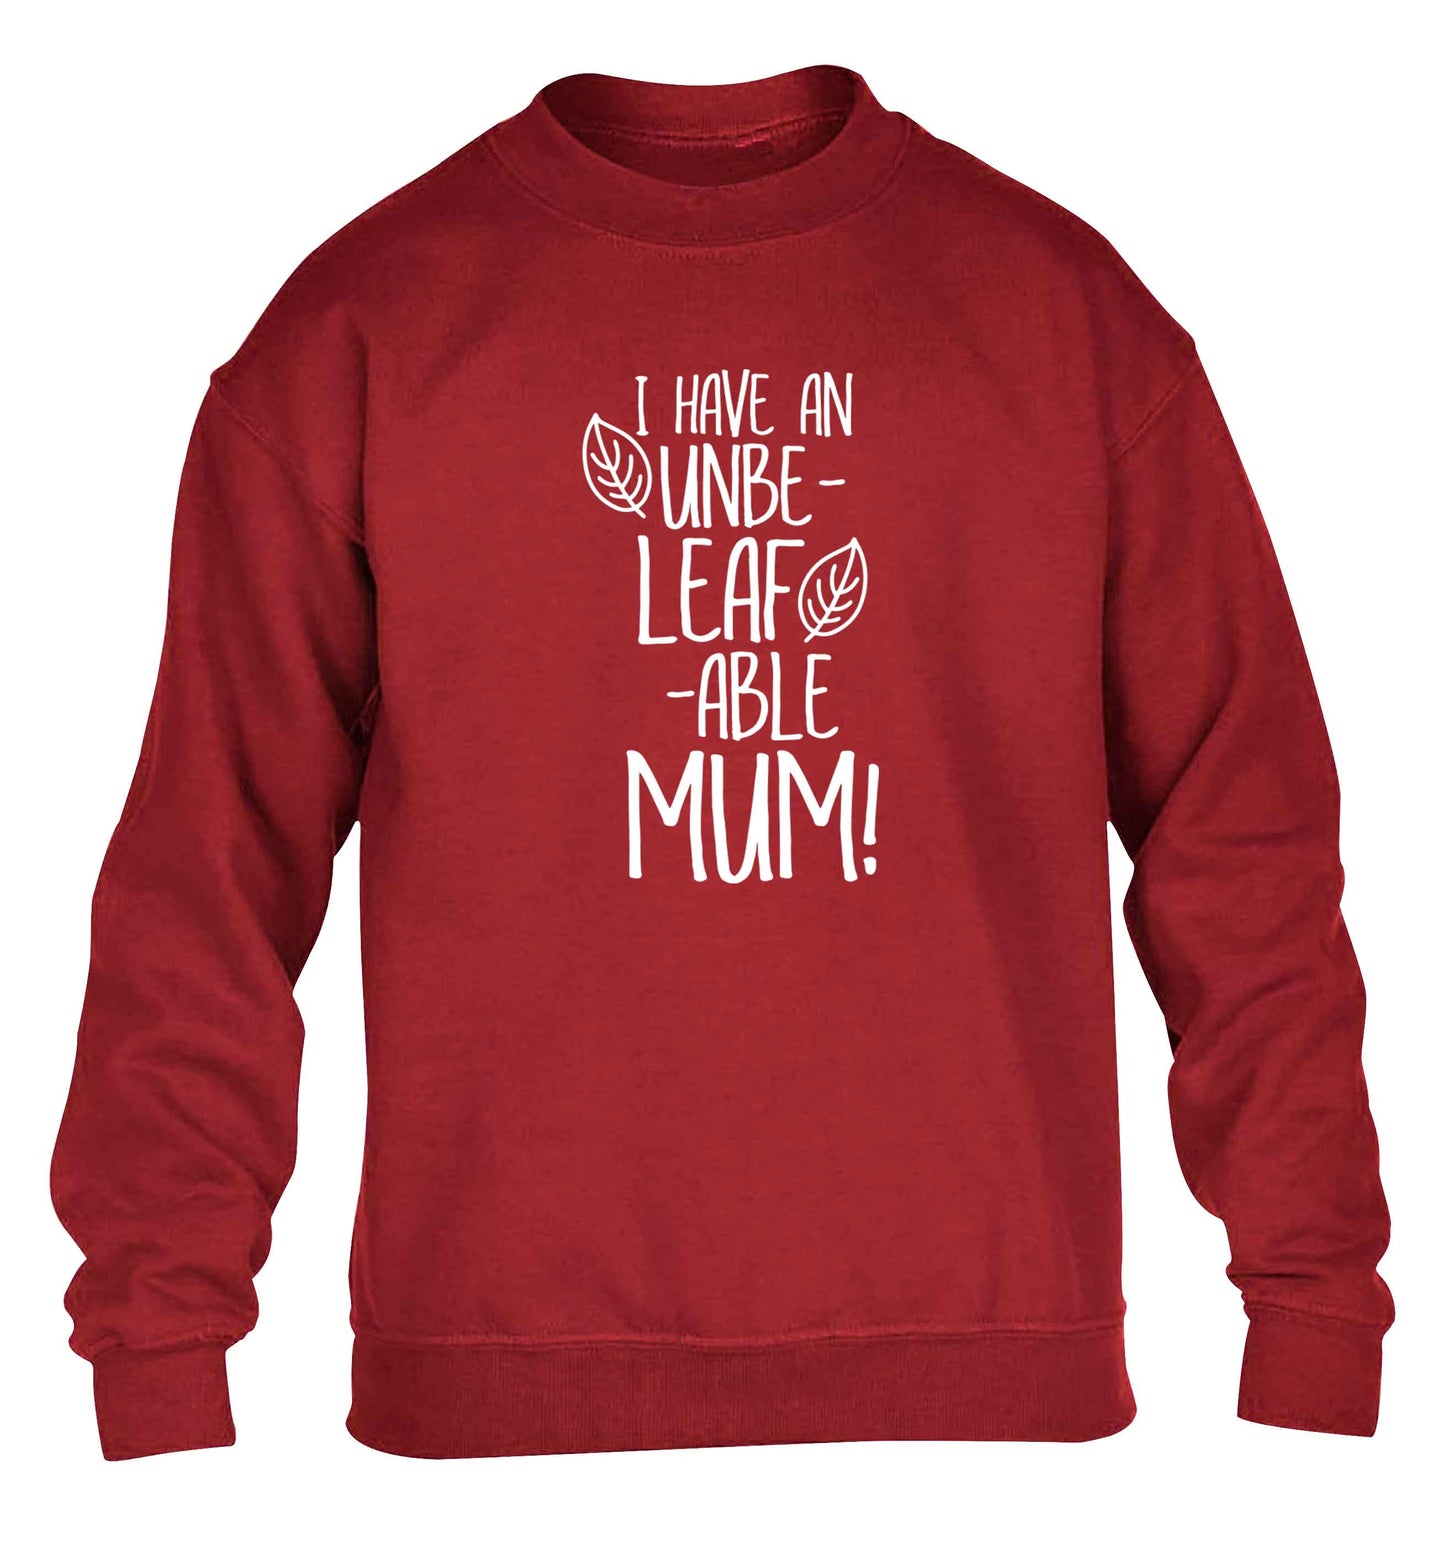 I have an unbeleafable mum! children's grey sweater 12-13 Years